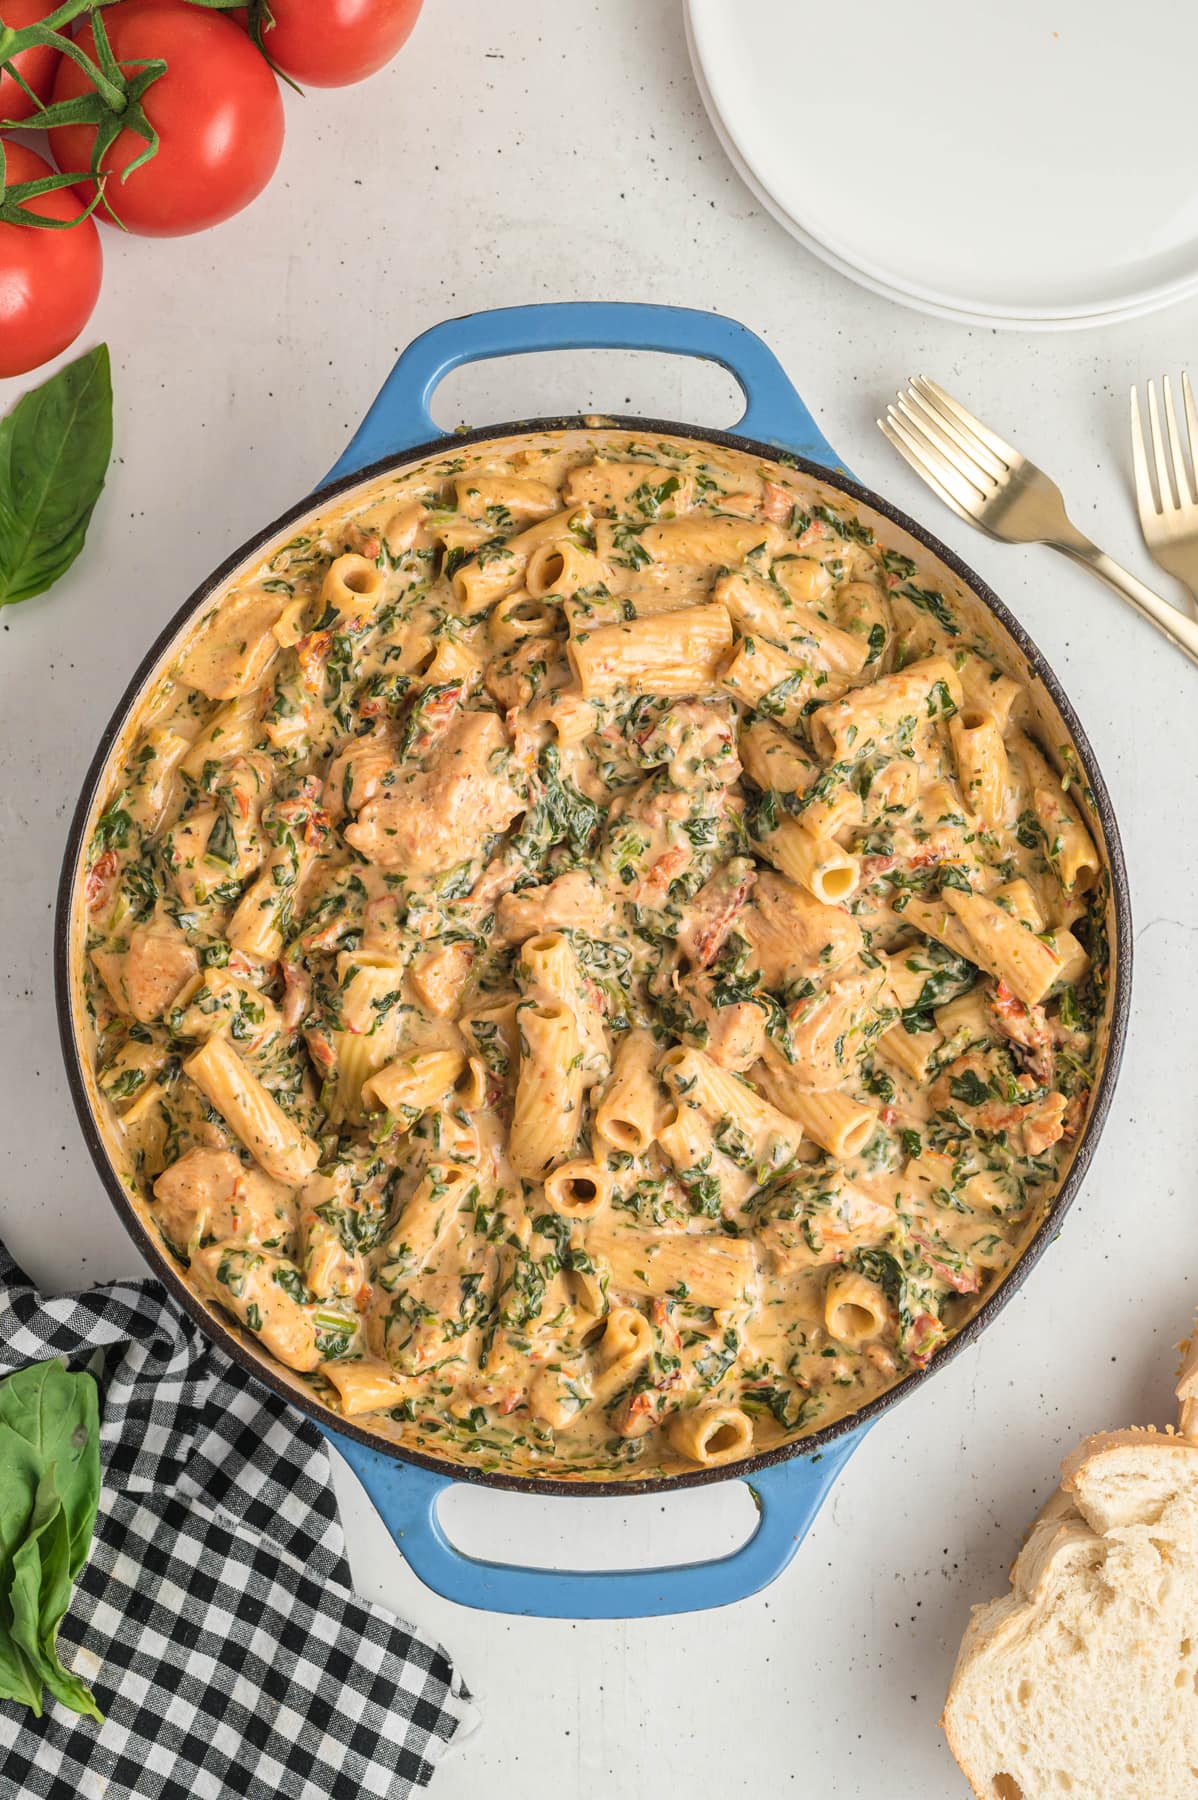 Overhead view of a skillet of Tuscan chicken pasta